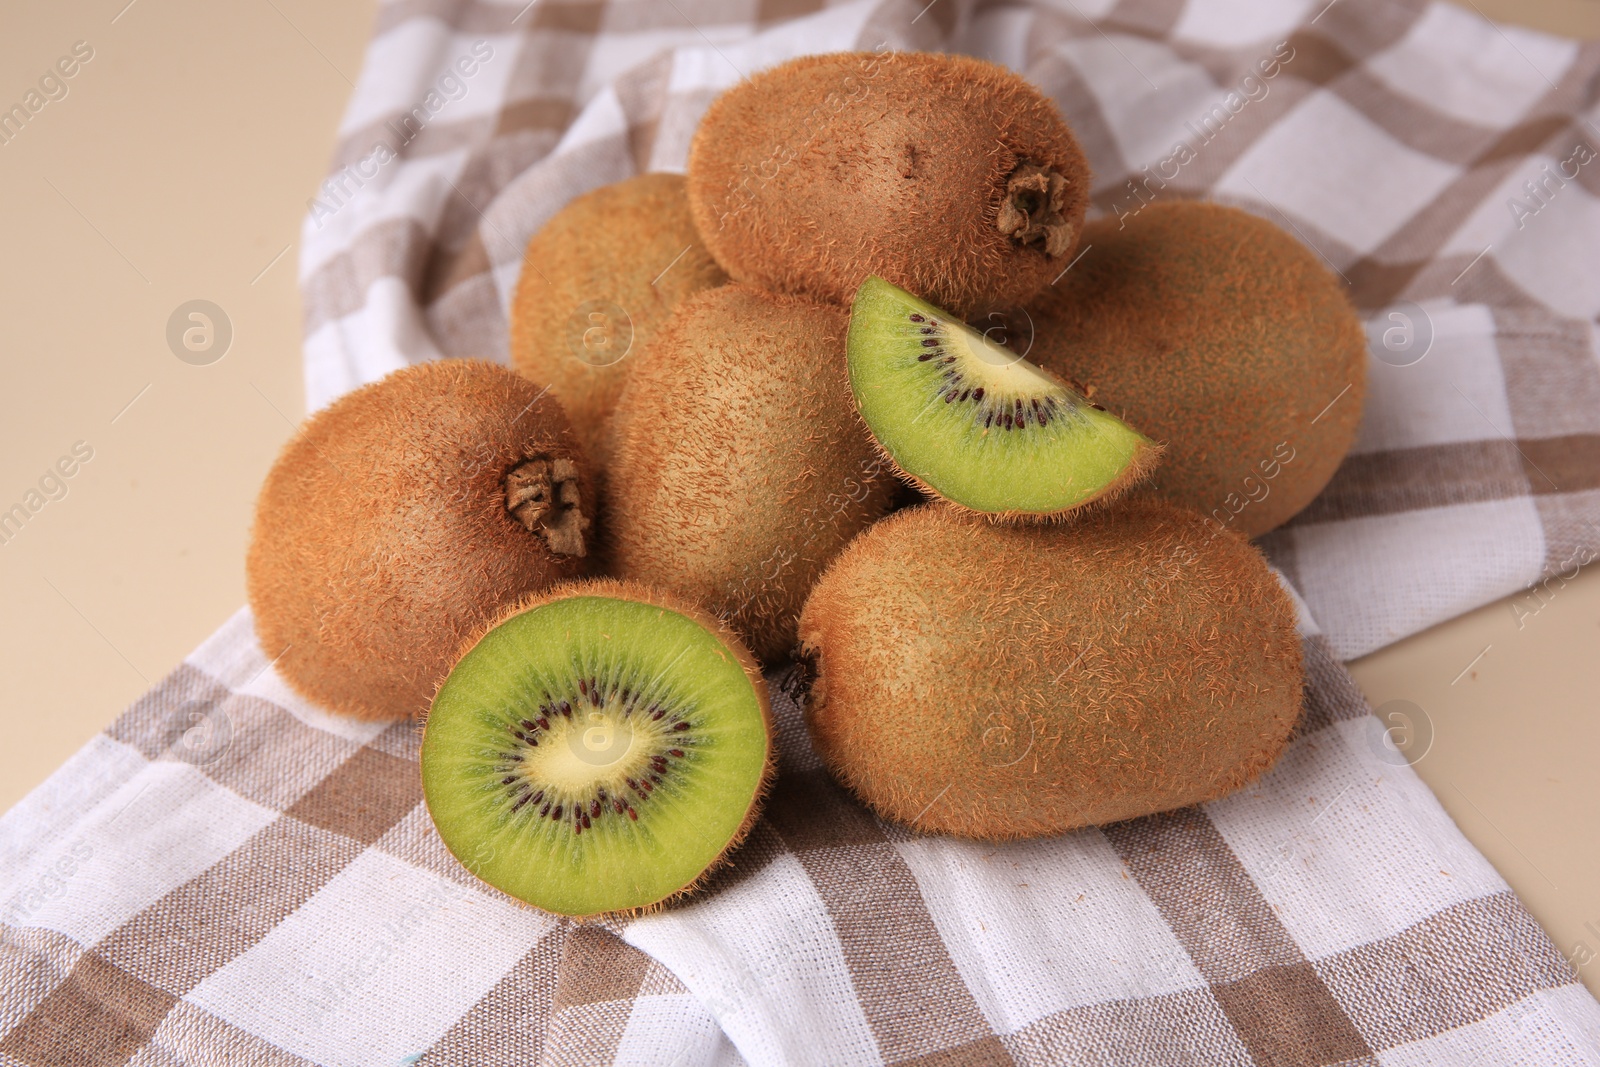 Photo of Heap of whole and cut fresh kiwis on beige table